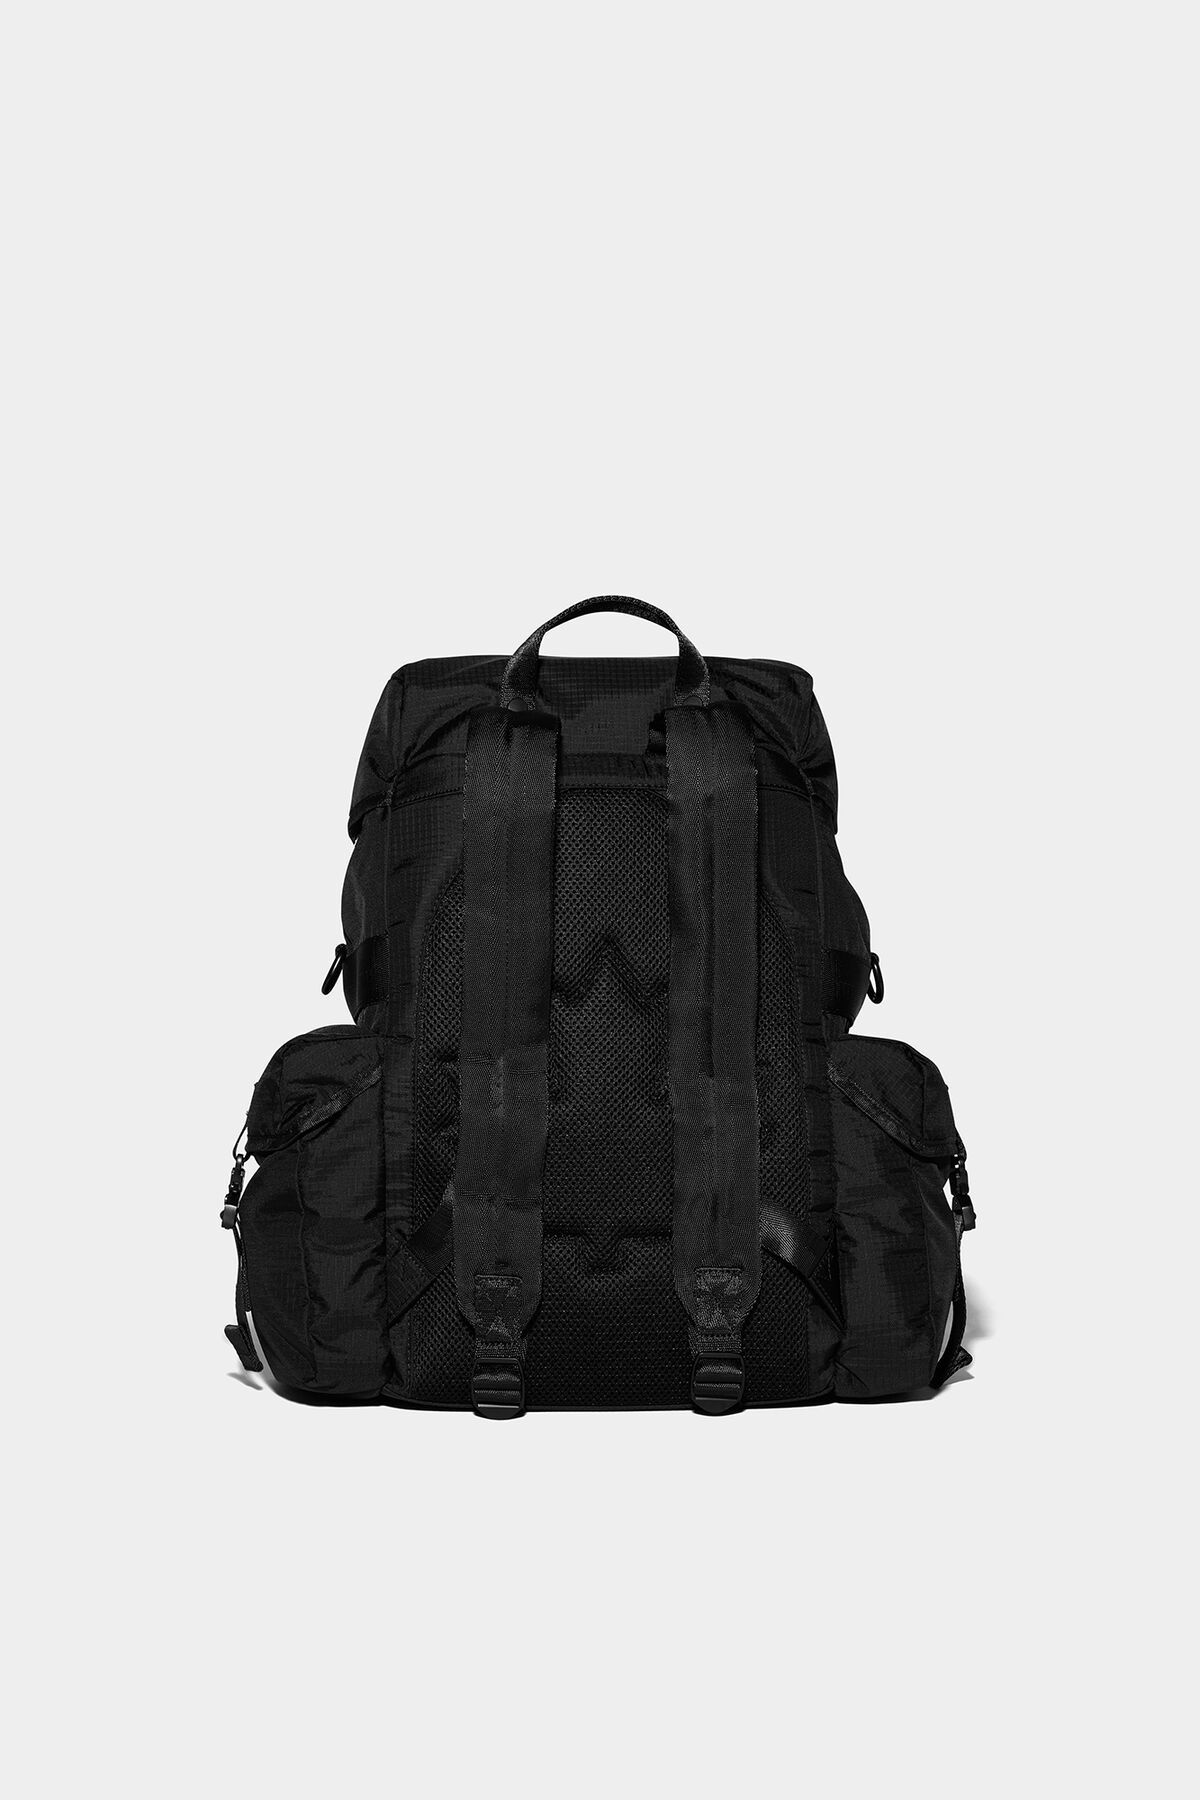 CERESIO 9 BACKPACK - 2